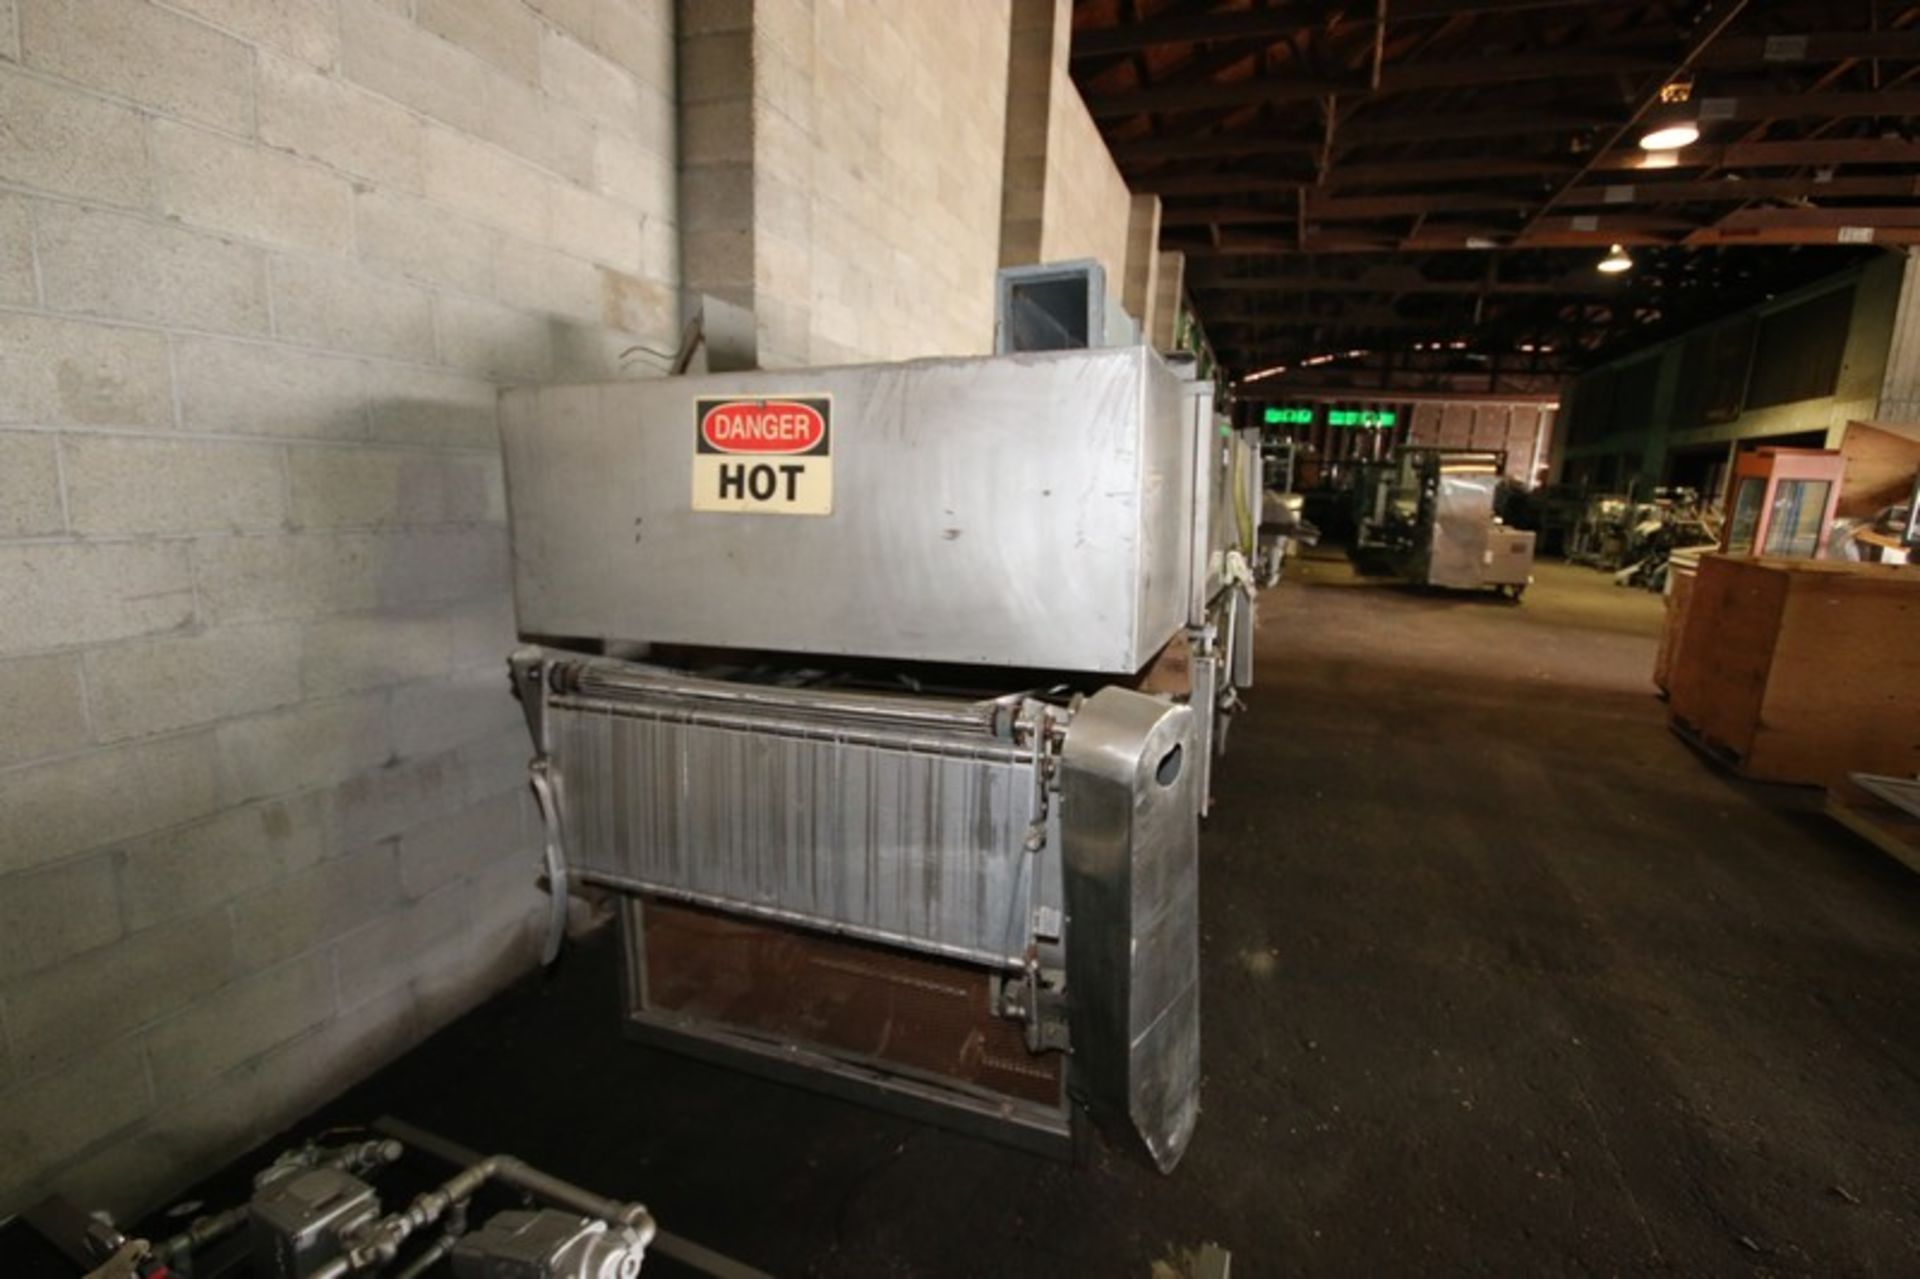 Higgs S/S Conveyor Bakery Fryer, Natural Gas Heated, 14' L x 54"W, Includes Exhaust Hood & Control - Image 6 of 11